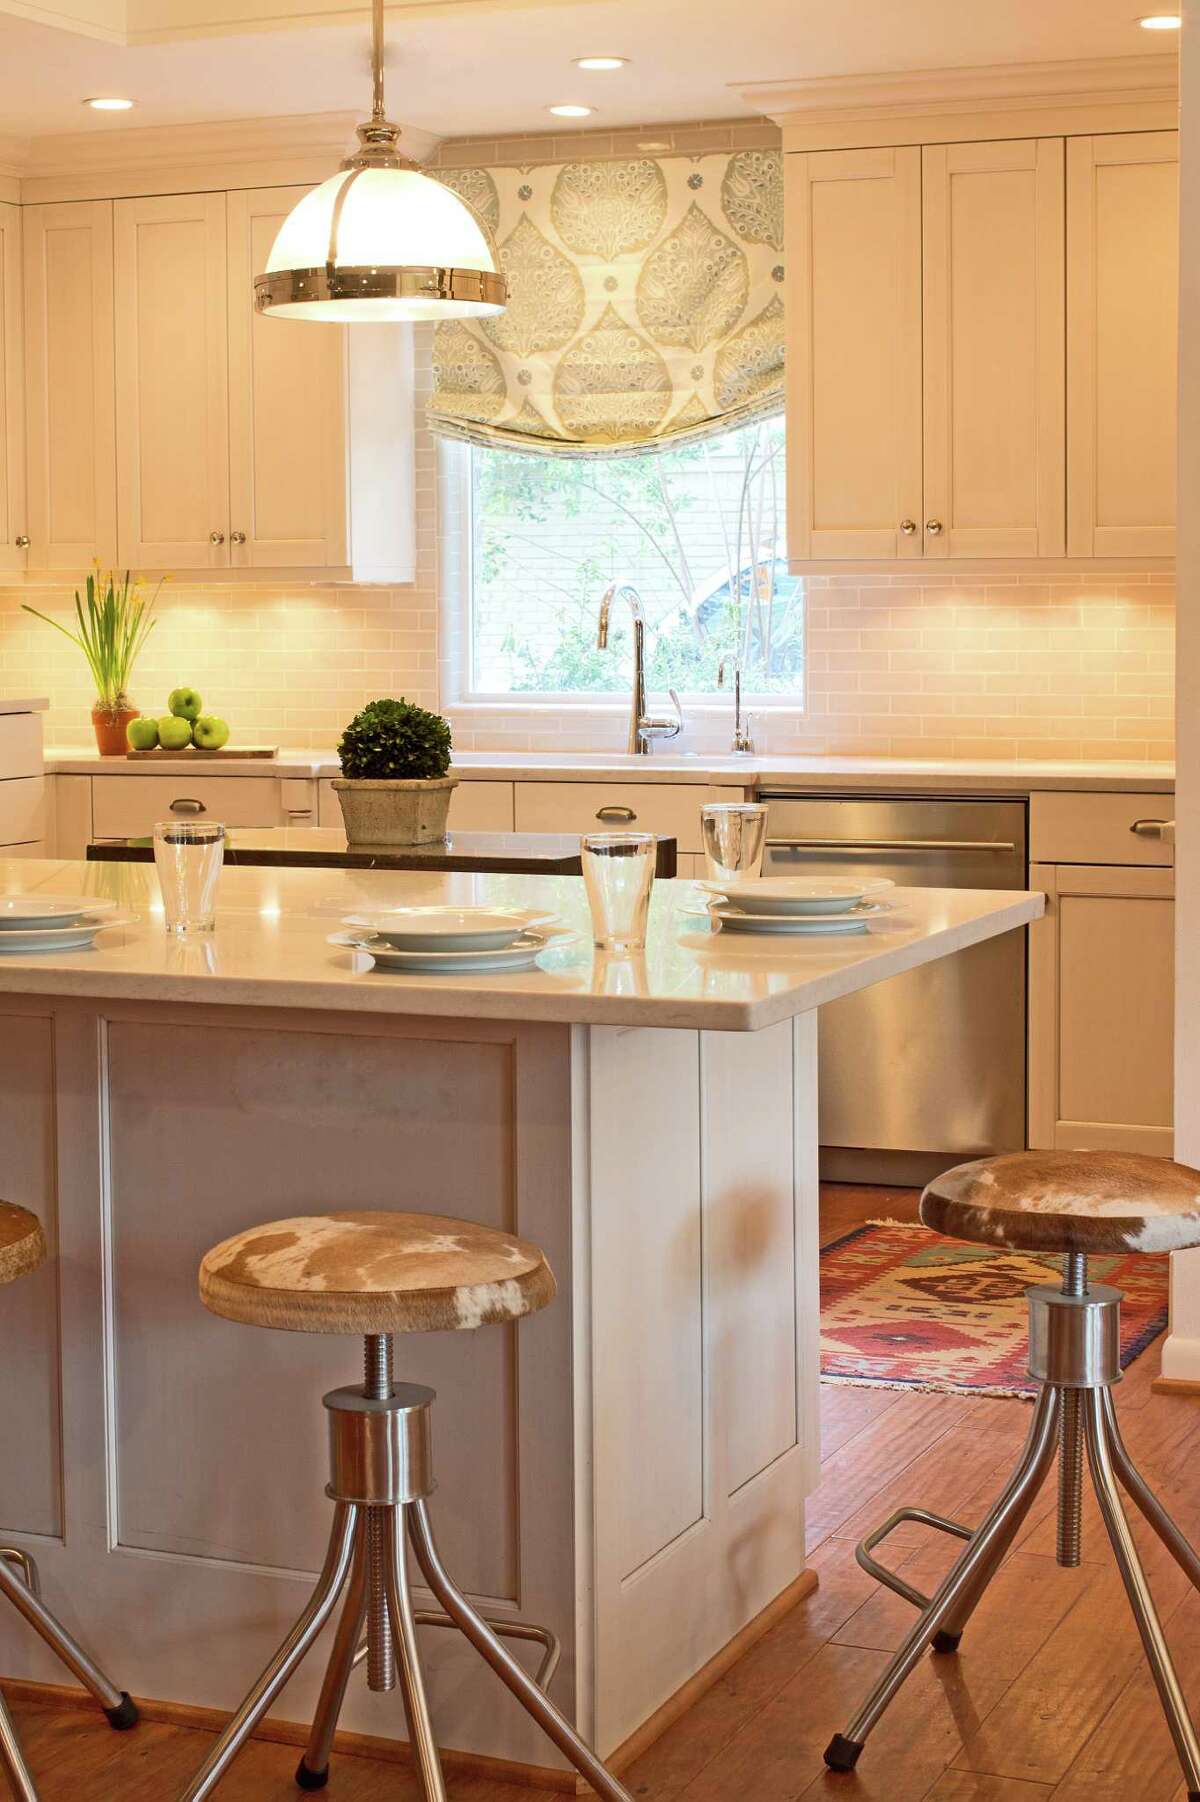 Silestone countertops and subway tile gave the Geisers' kitchen a bright, fresh look. The peninsula counter, which separates the kitchen from the family room, is now where they eat most of their casual meals.